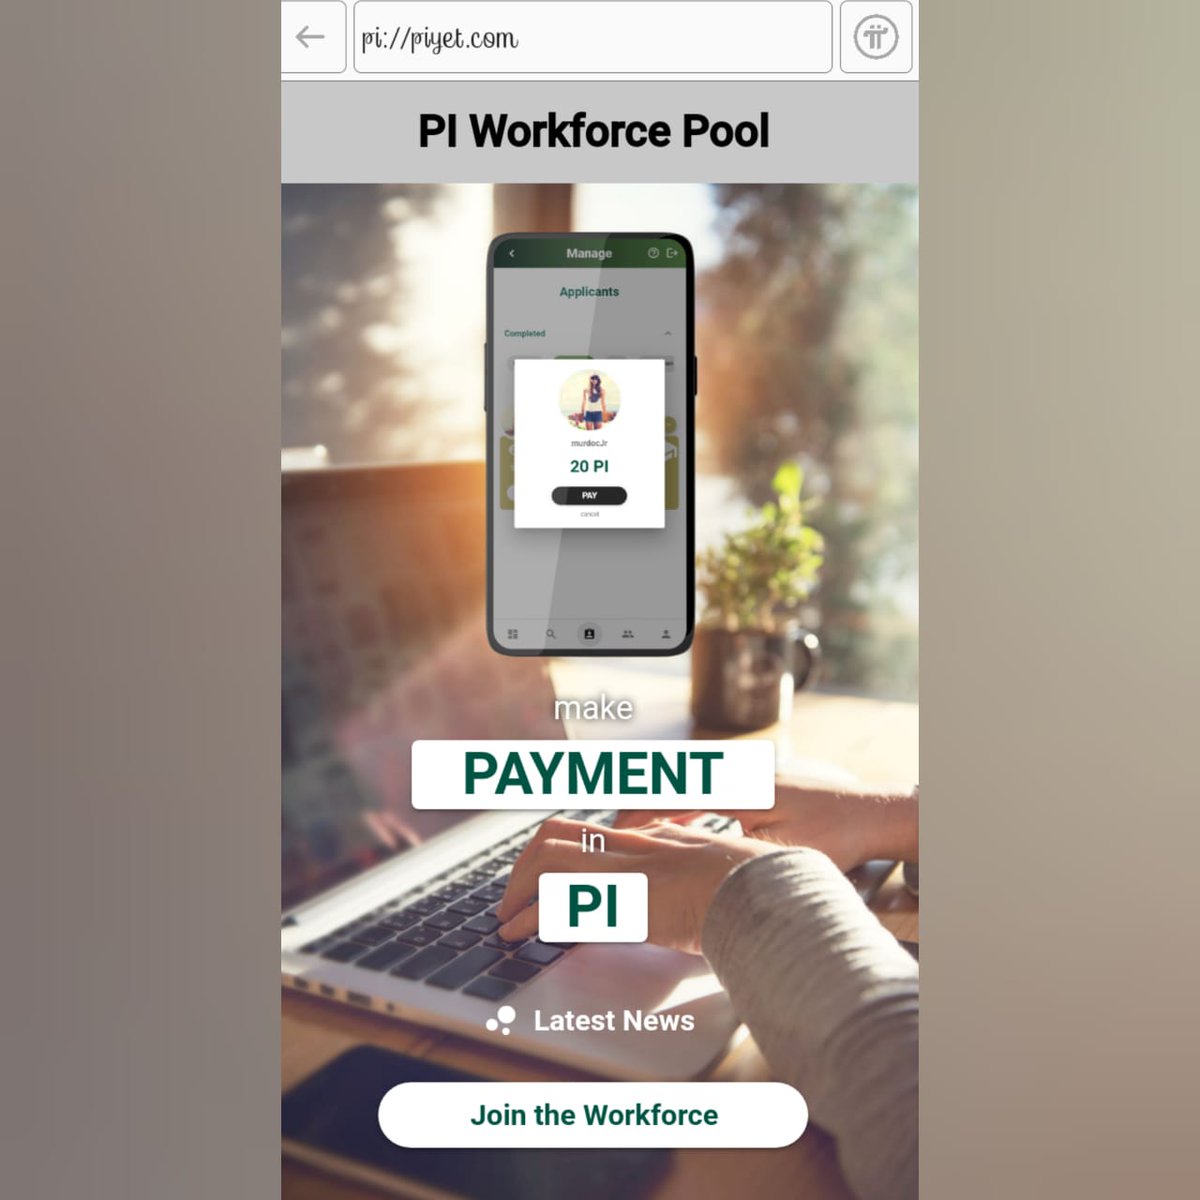 MAINNET is almost here !!!

Freelancing will be as easy as Pi

You will be able to pay for services using Pi on WorkforcePool. 

You will earn more Pi by selling services on WorkforcePool. 

#easyfreelance #earnpi #spendpi #pinetwork #pimainnet #pinewszone #picoreteam #PiNetwork